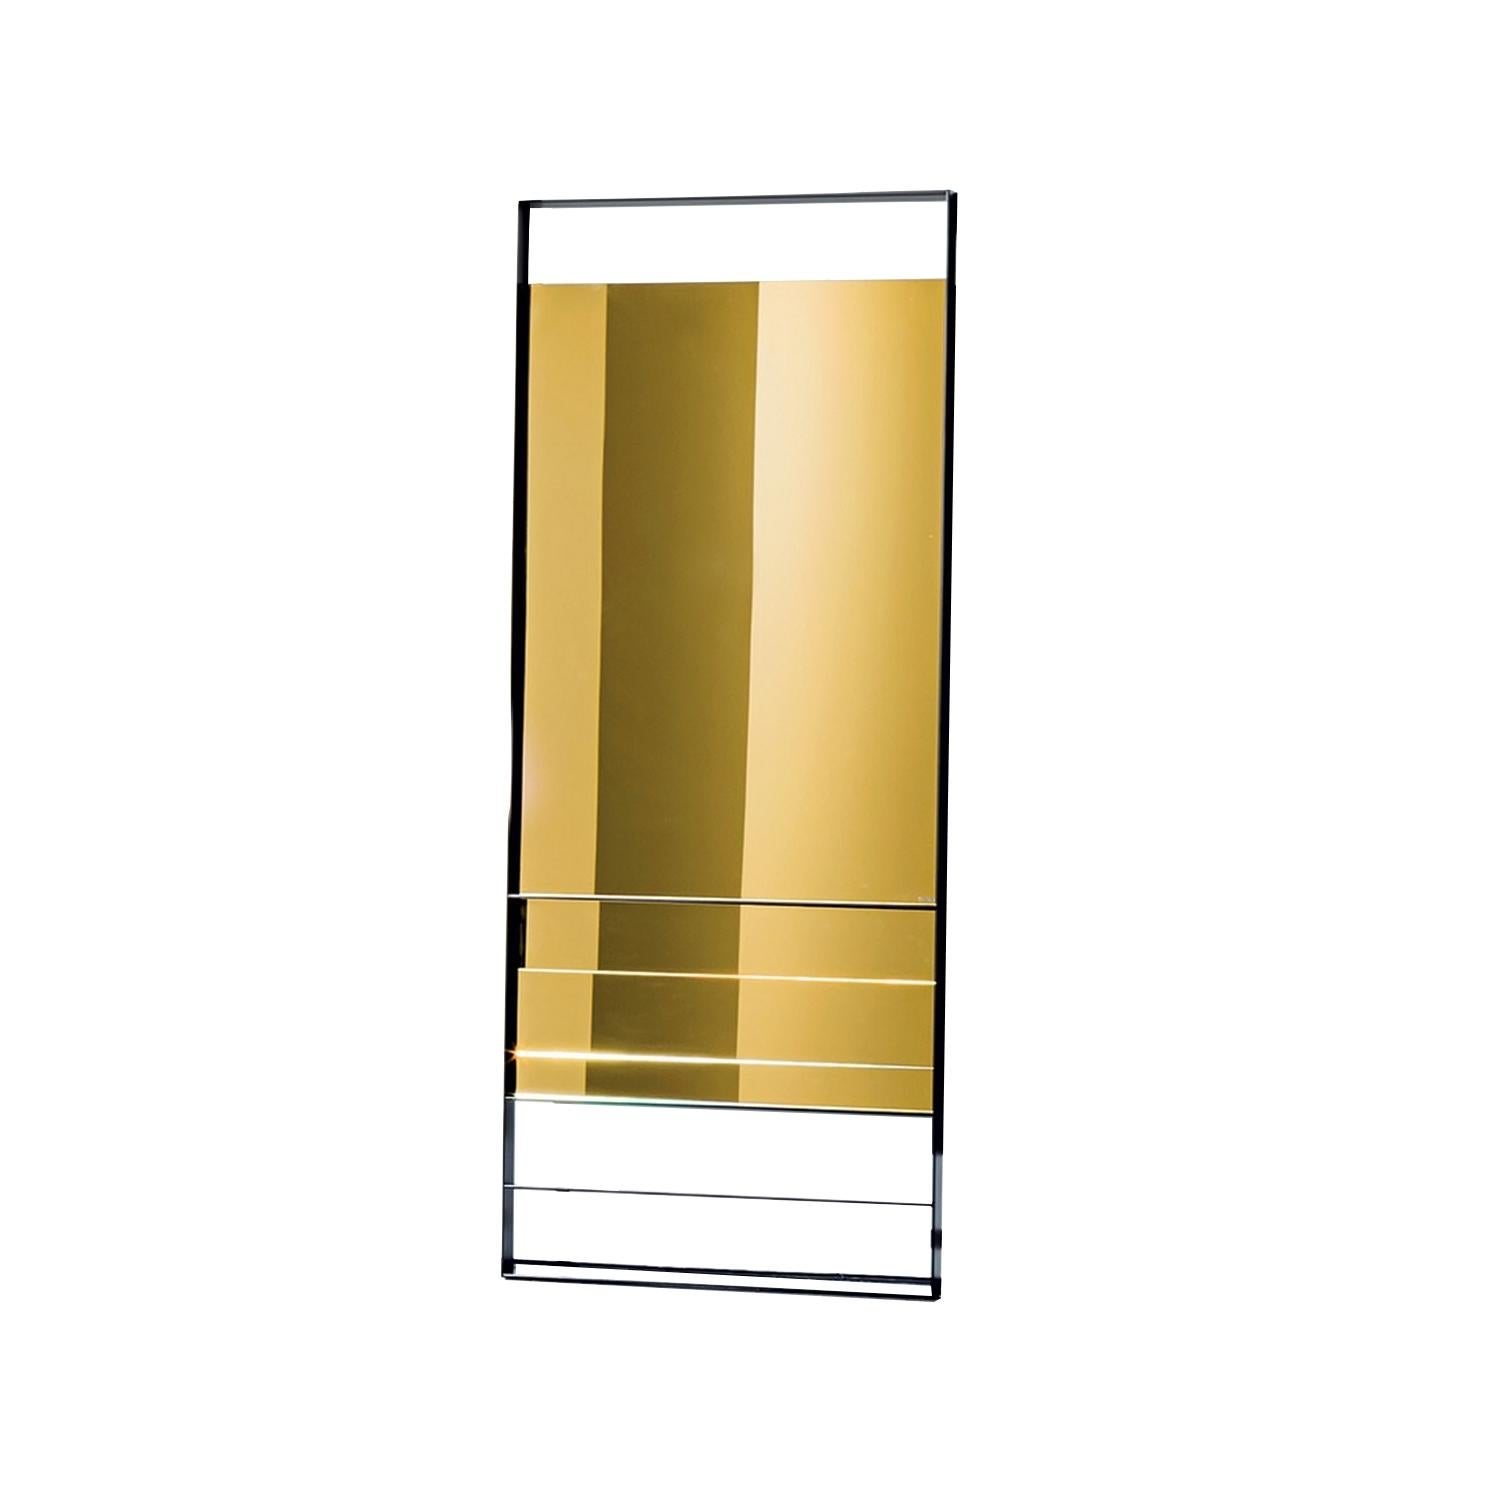 Floor or horizontal / vertical hanging rectangular mirror with lacquered metal frame in burnished brass finish. 
--
Made in Italy
Designed by Lievore Altherr Molina